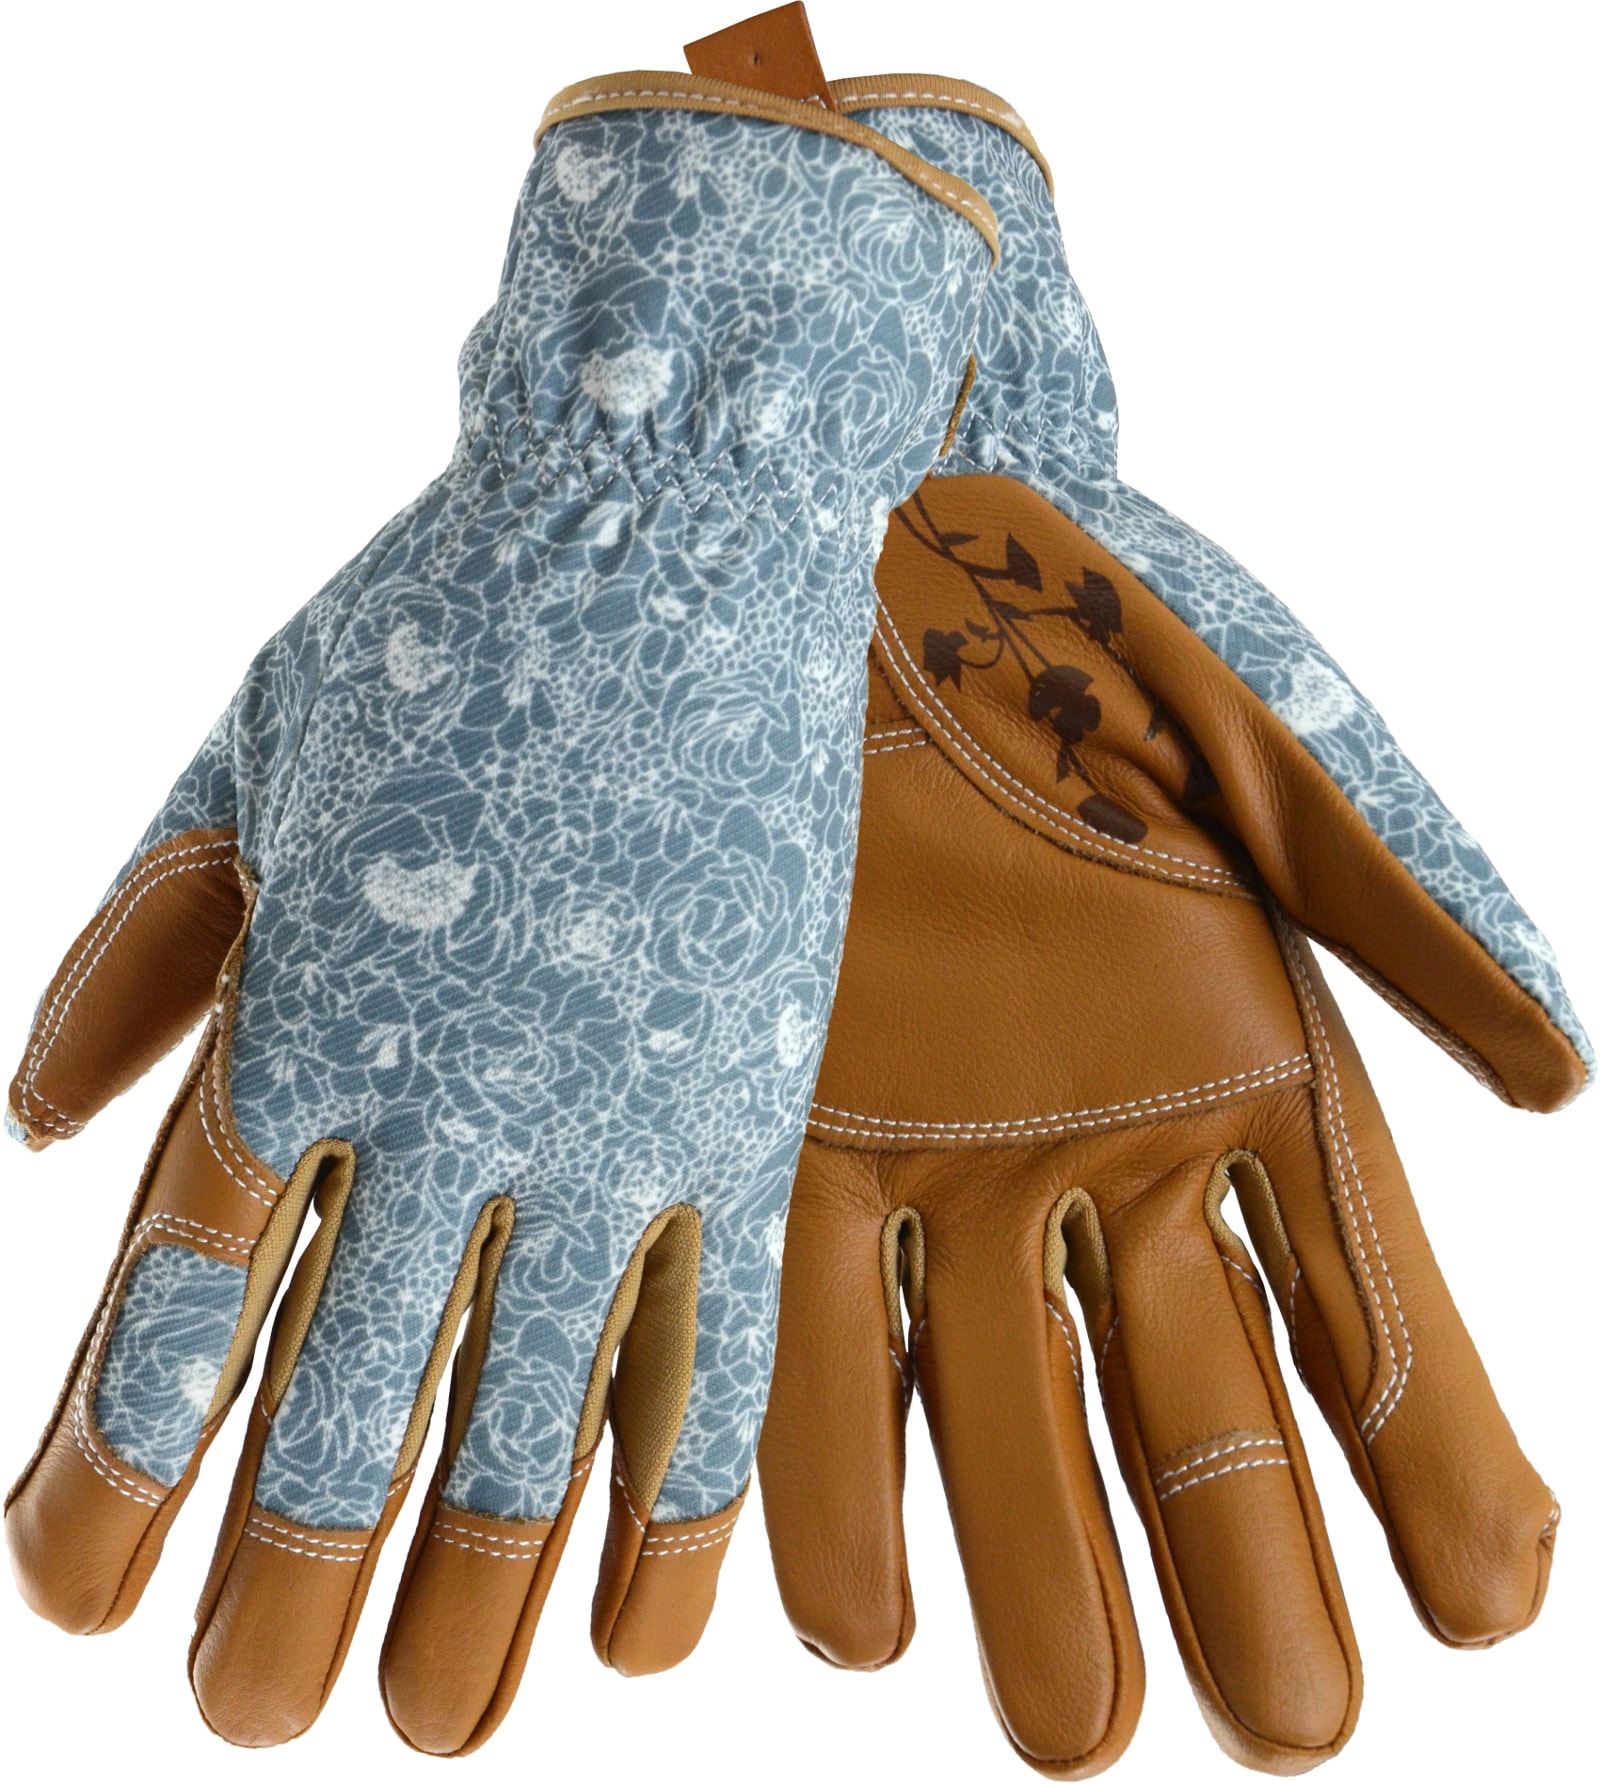 Style Selections Large Leather Gardening Gloves, (1-Pair) at